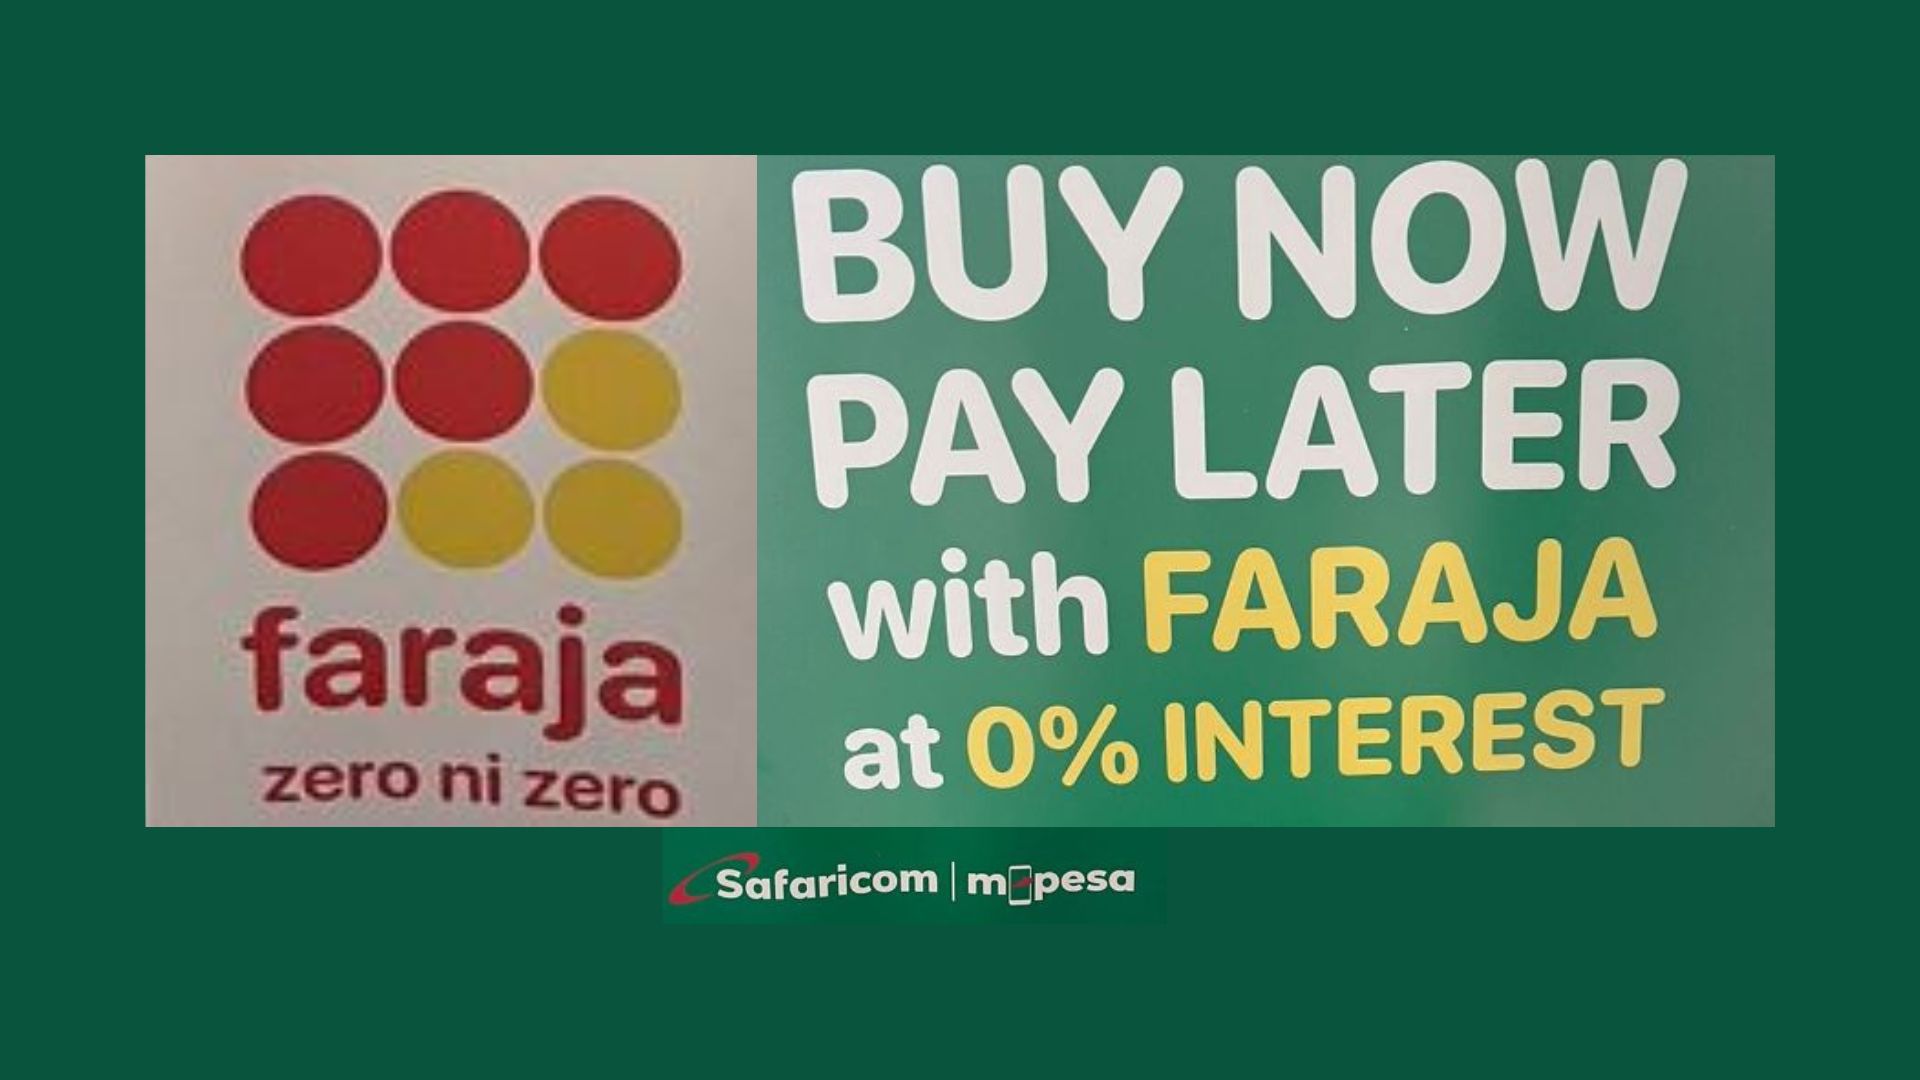 How to use Safaricom Faraja Loan (Buy Now and Pay Later)